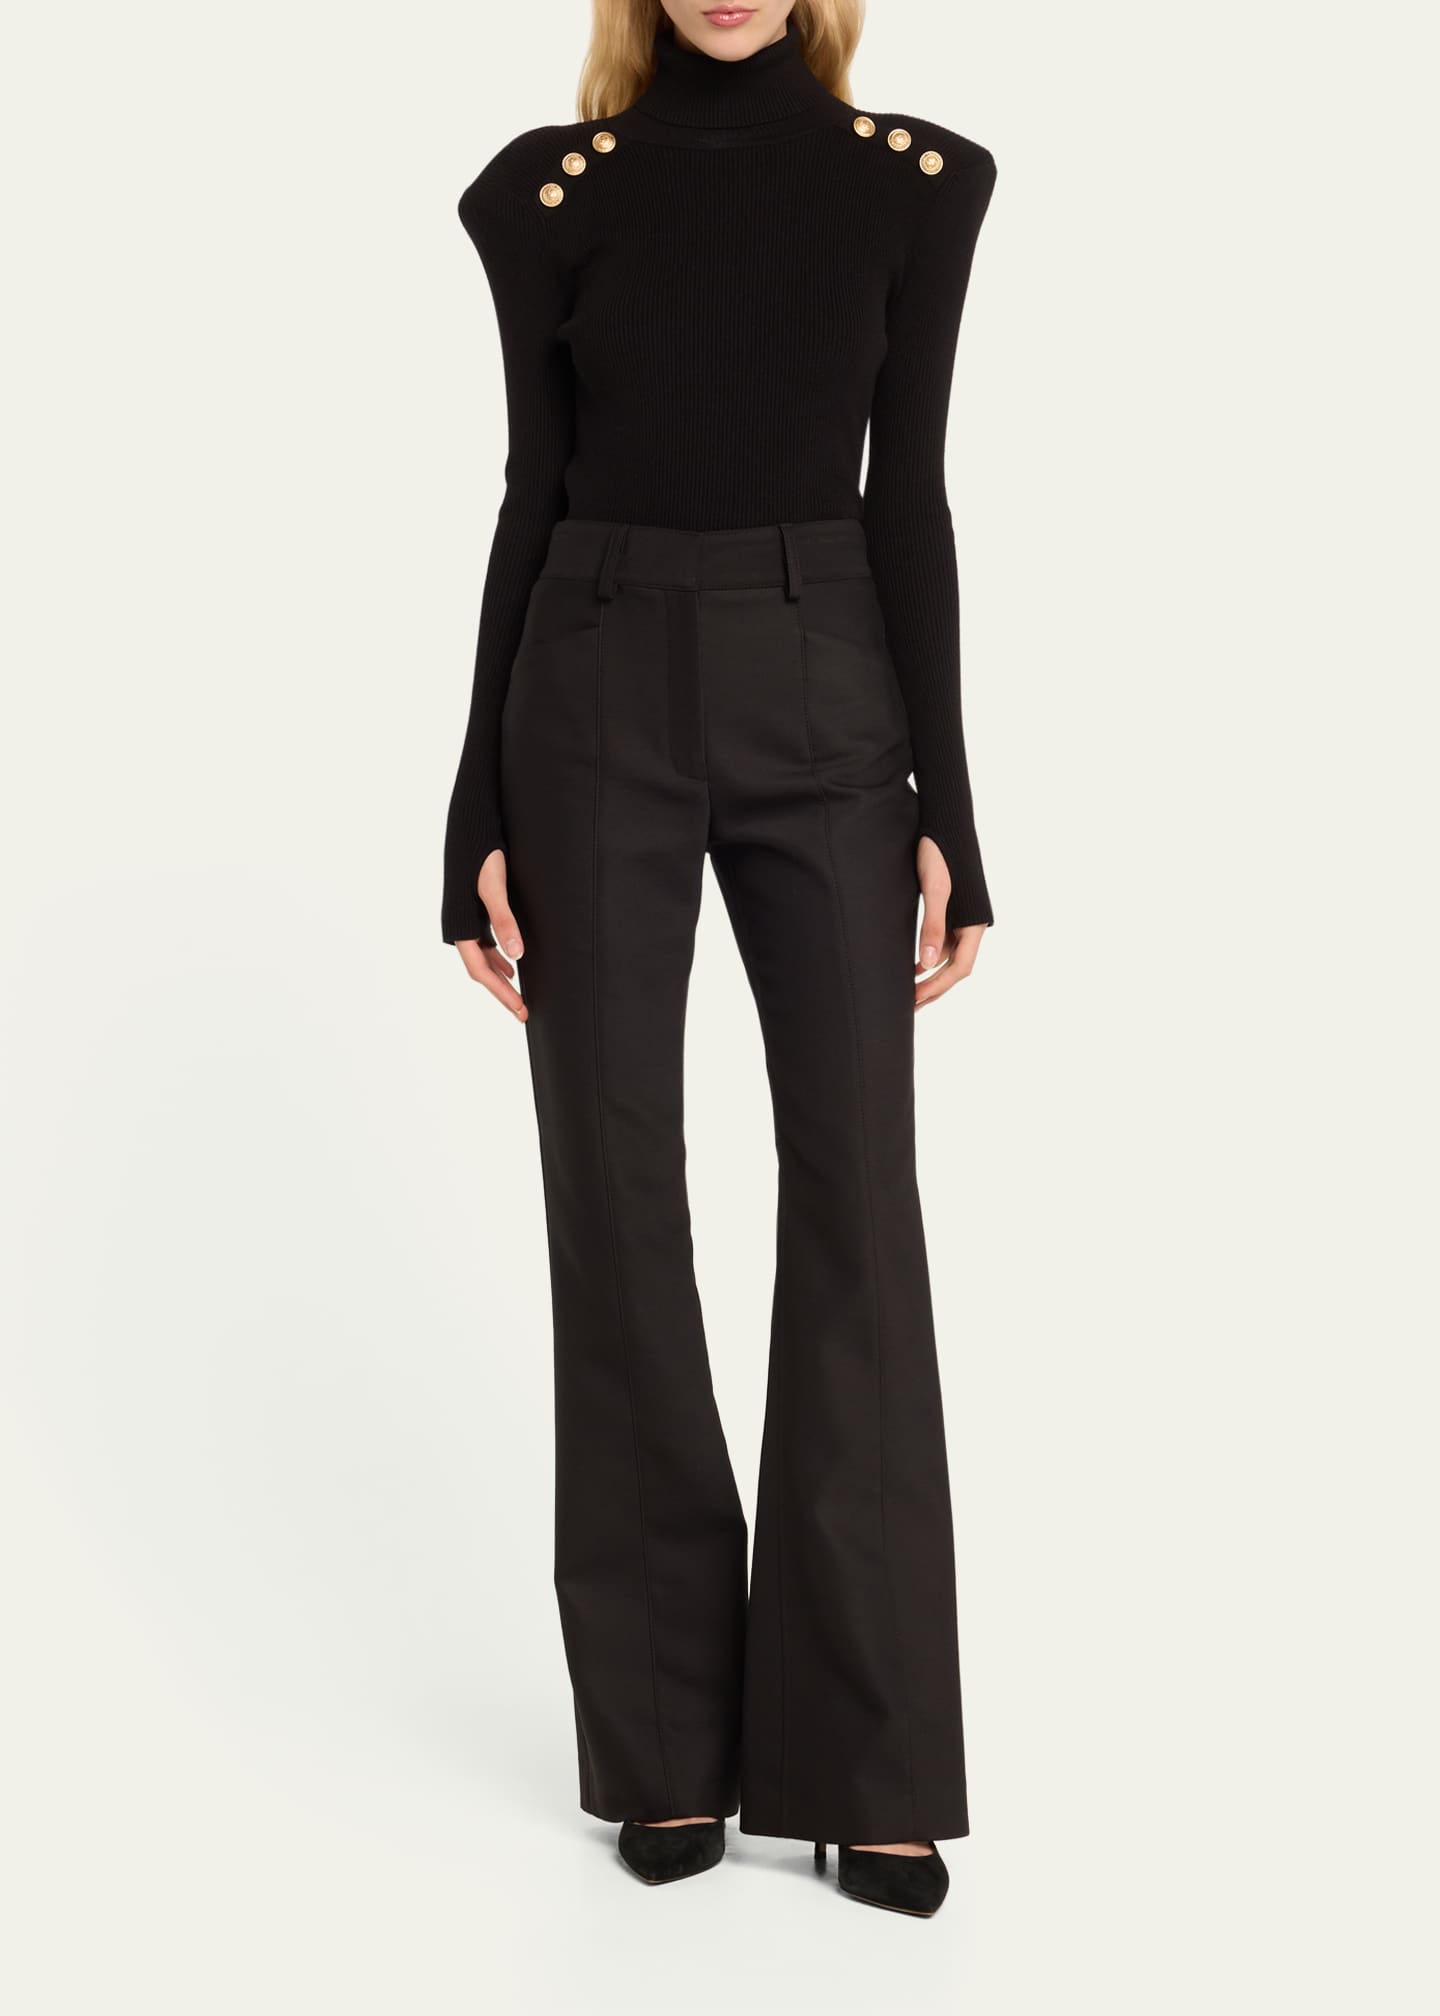 L'Agence Reeves Ribbed Button-Detail Turtleneck - Bergdorf Goodman